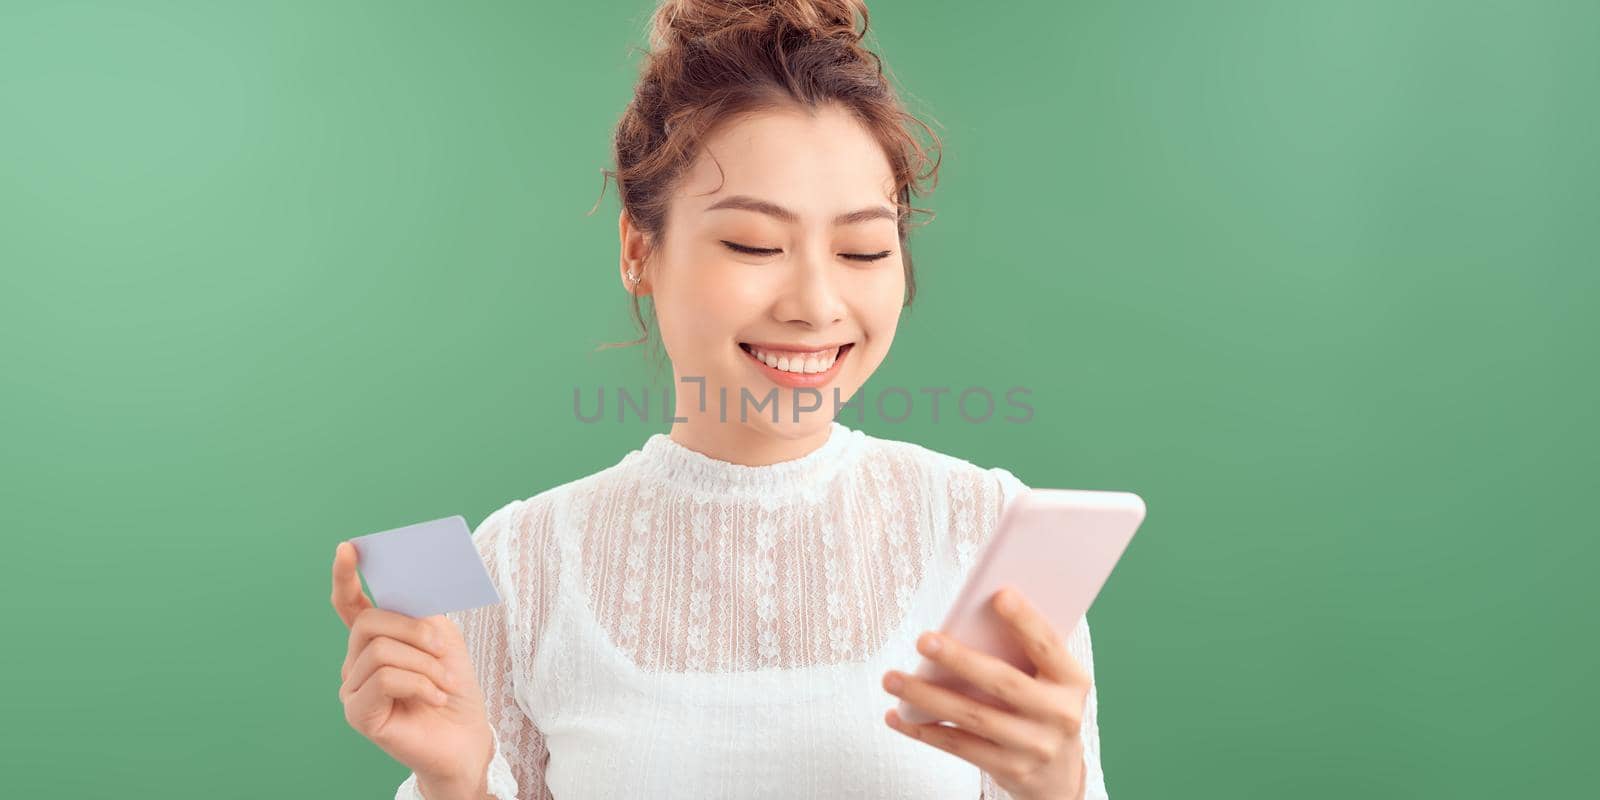 A beautiful portrait of a happy young girl showing plastic credit card while holding mobile phone isolated over green background